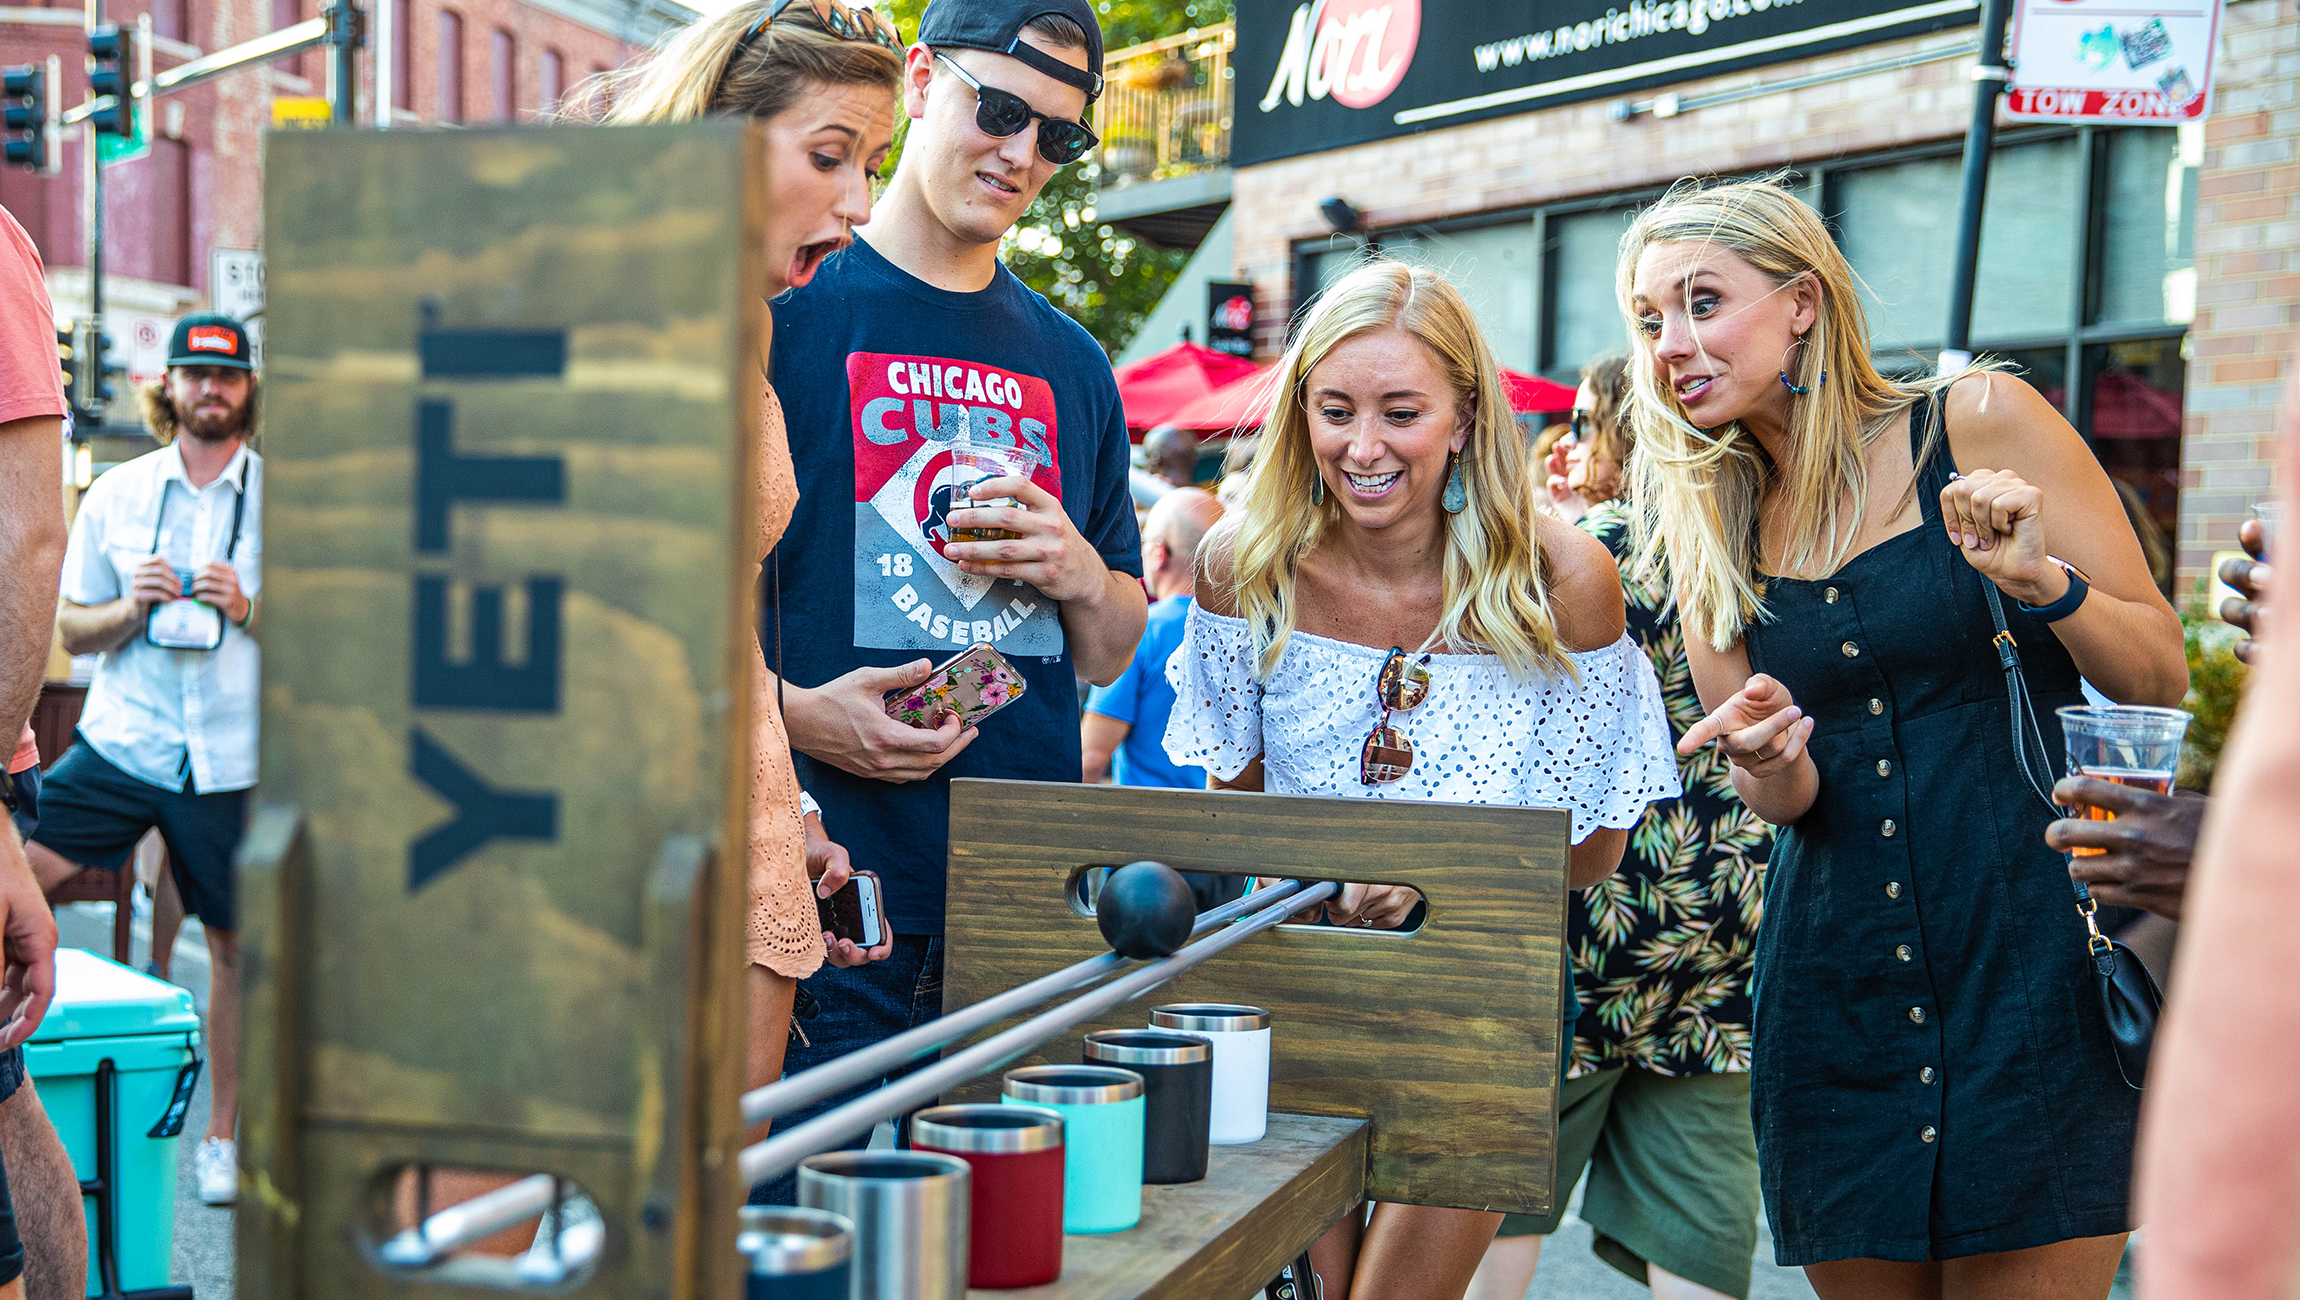 Fans play a game at the YETI pop-up.